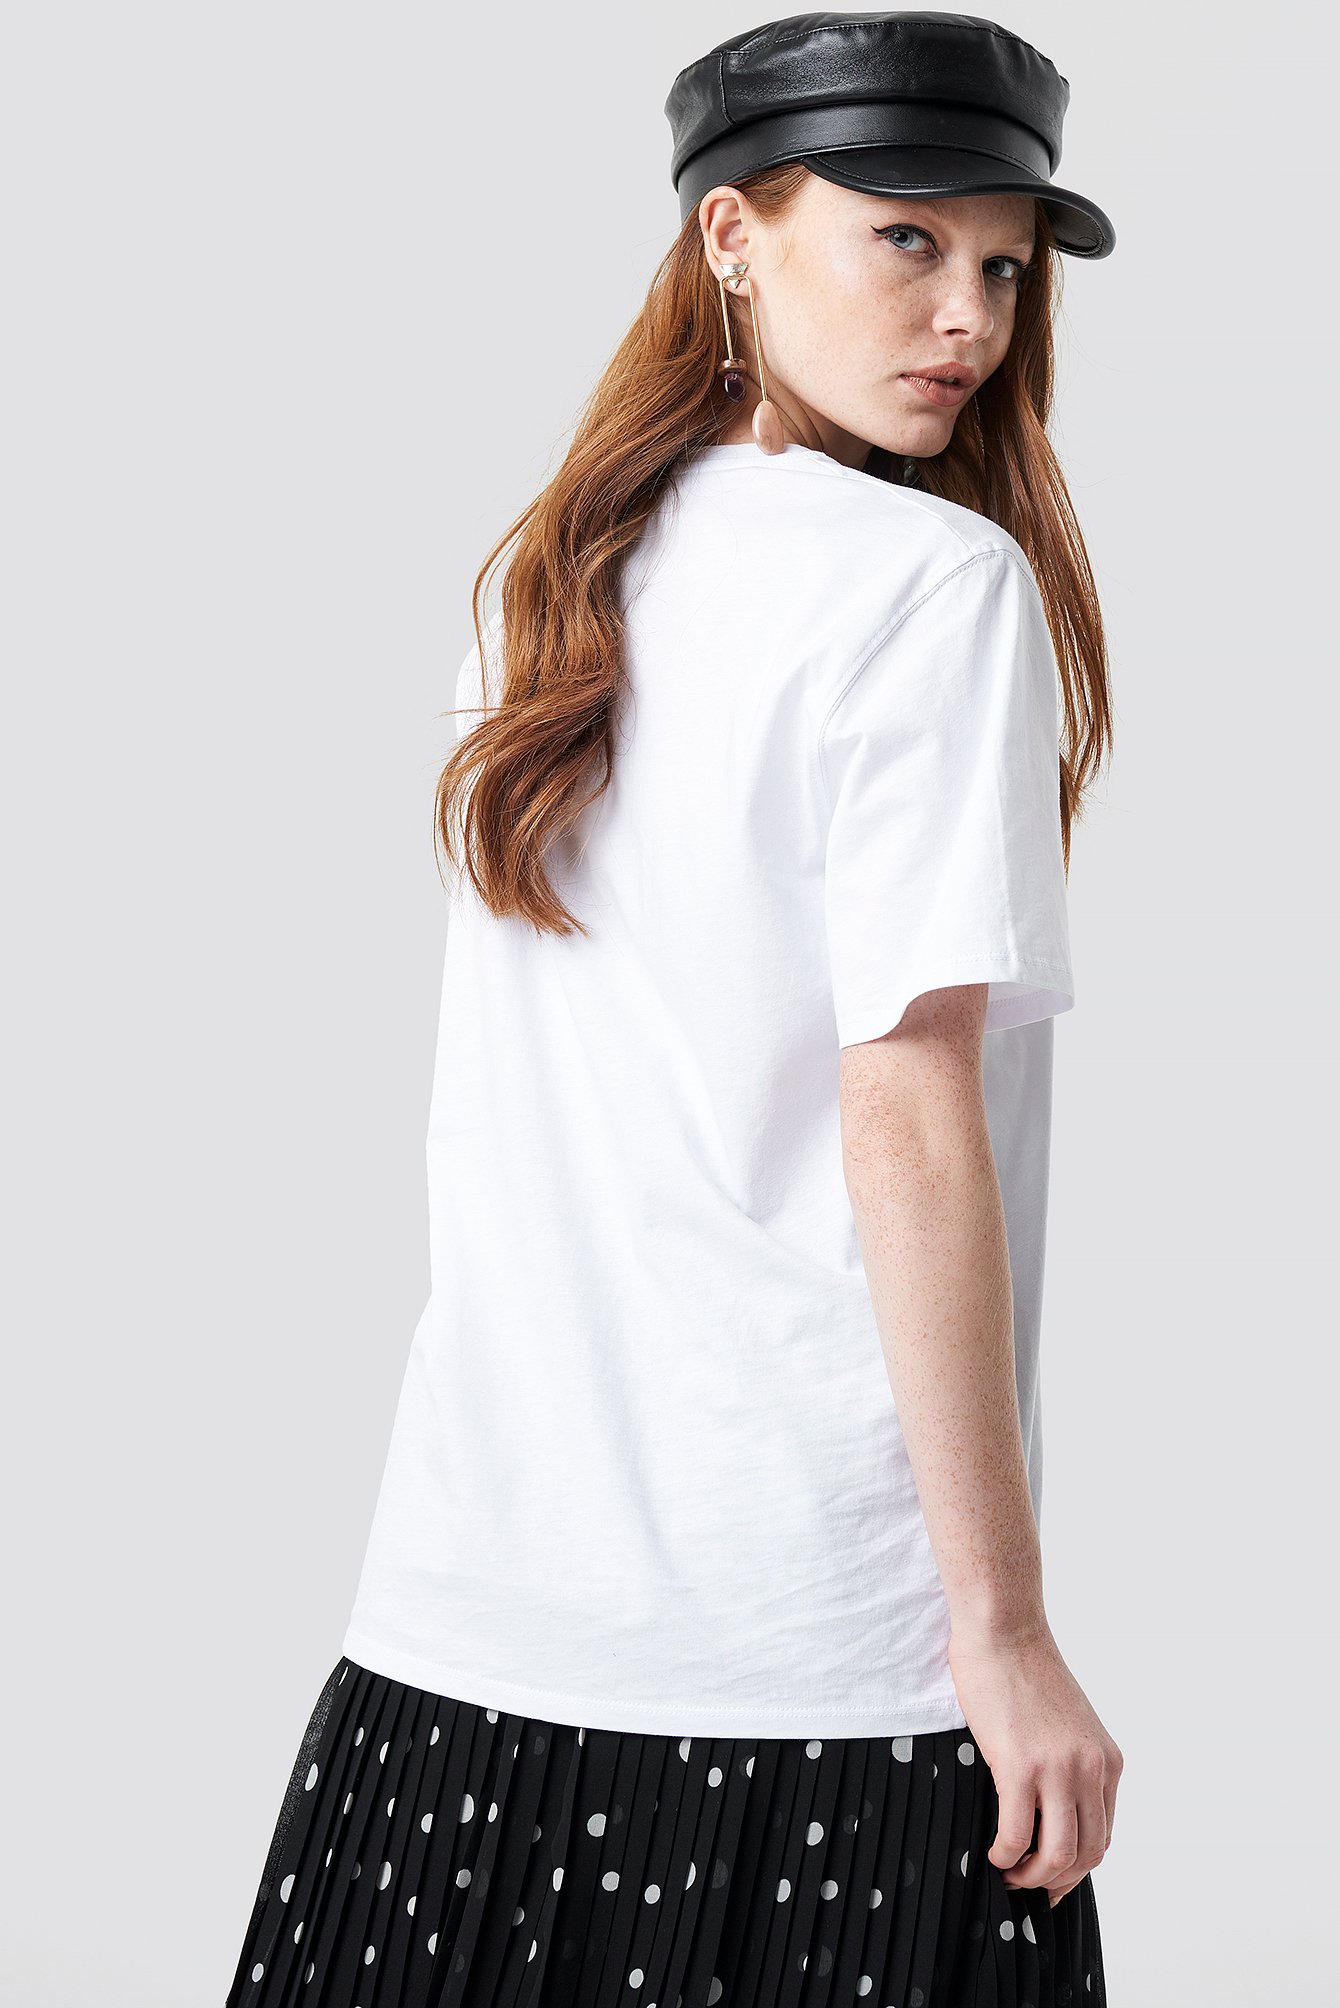 White Trouble Makers Basic Tee